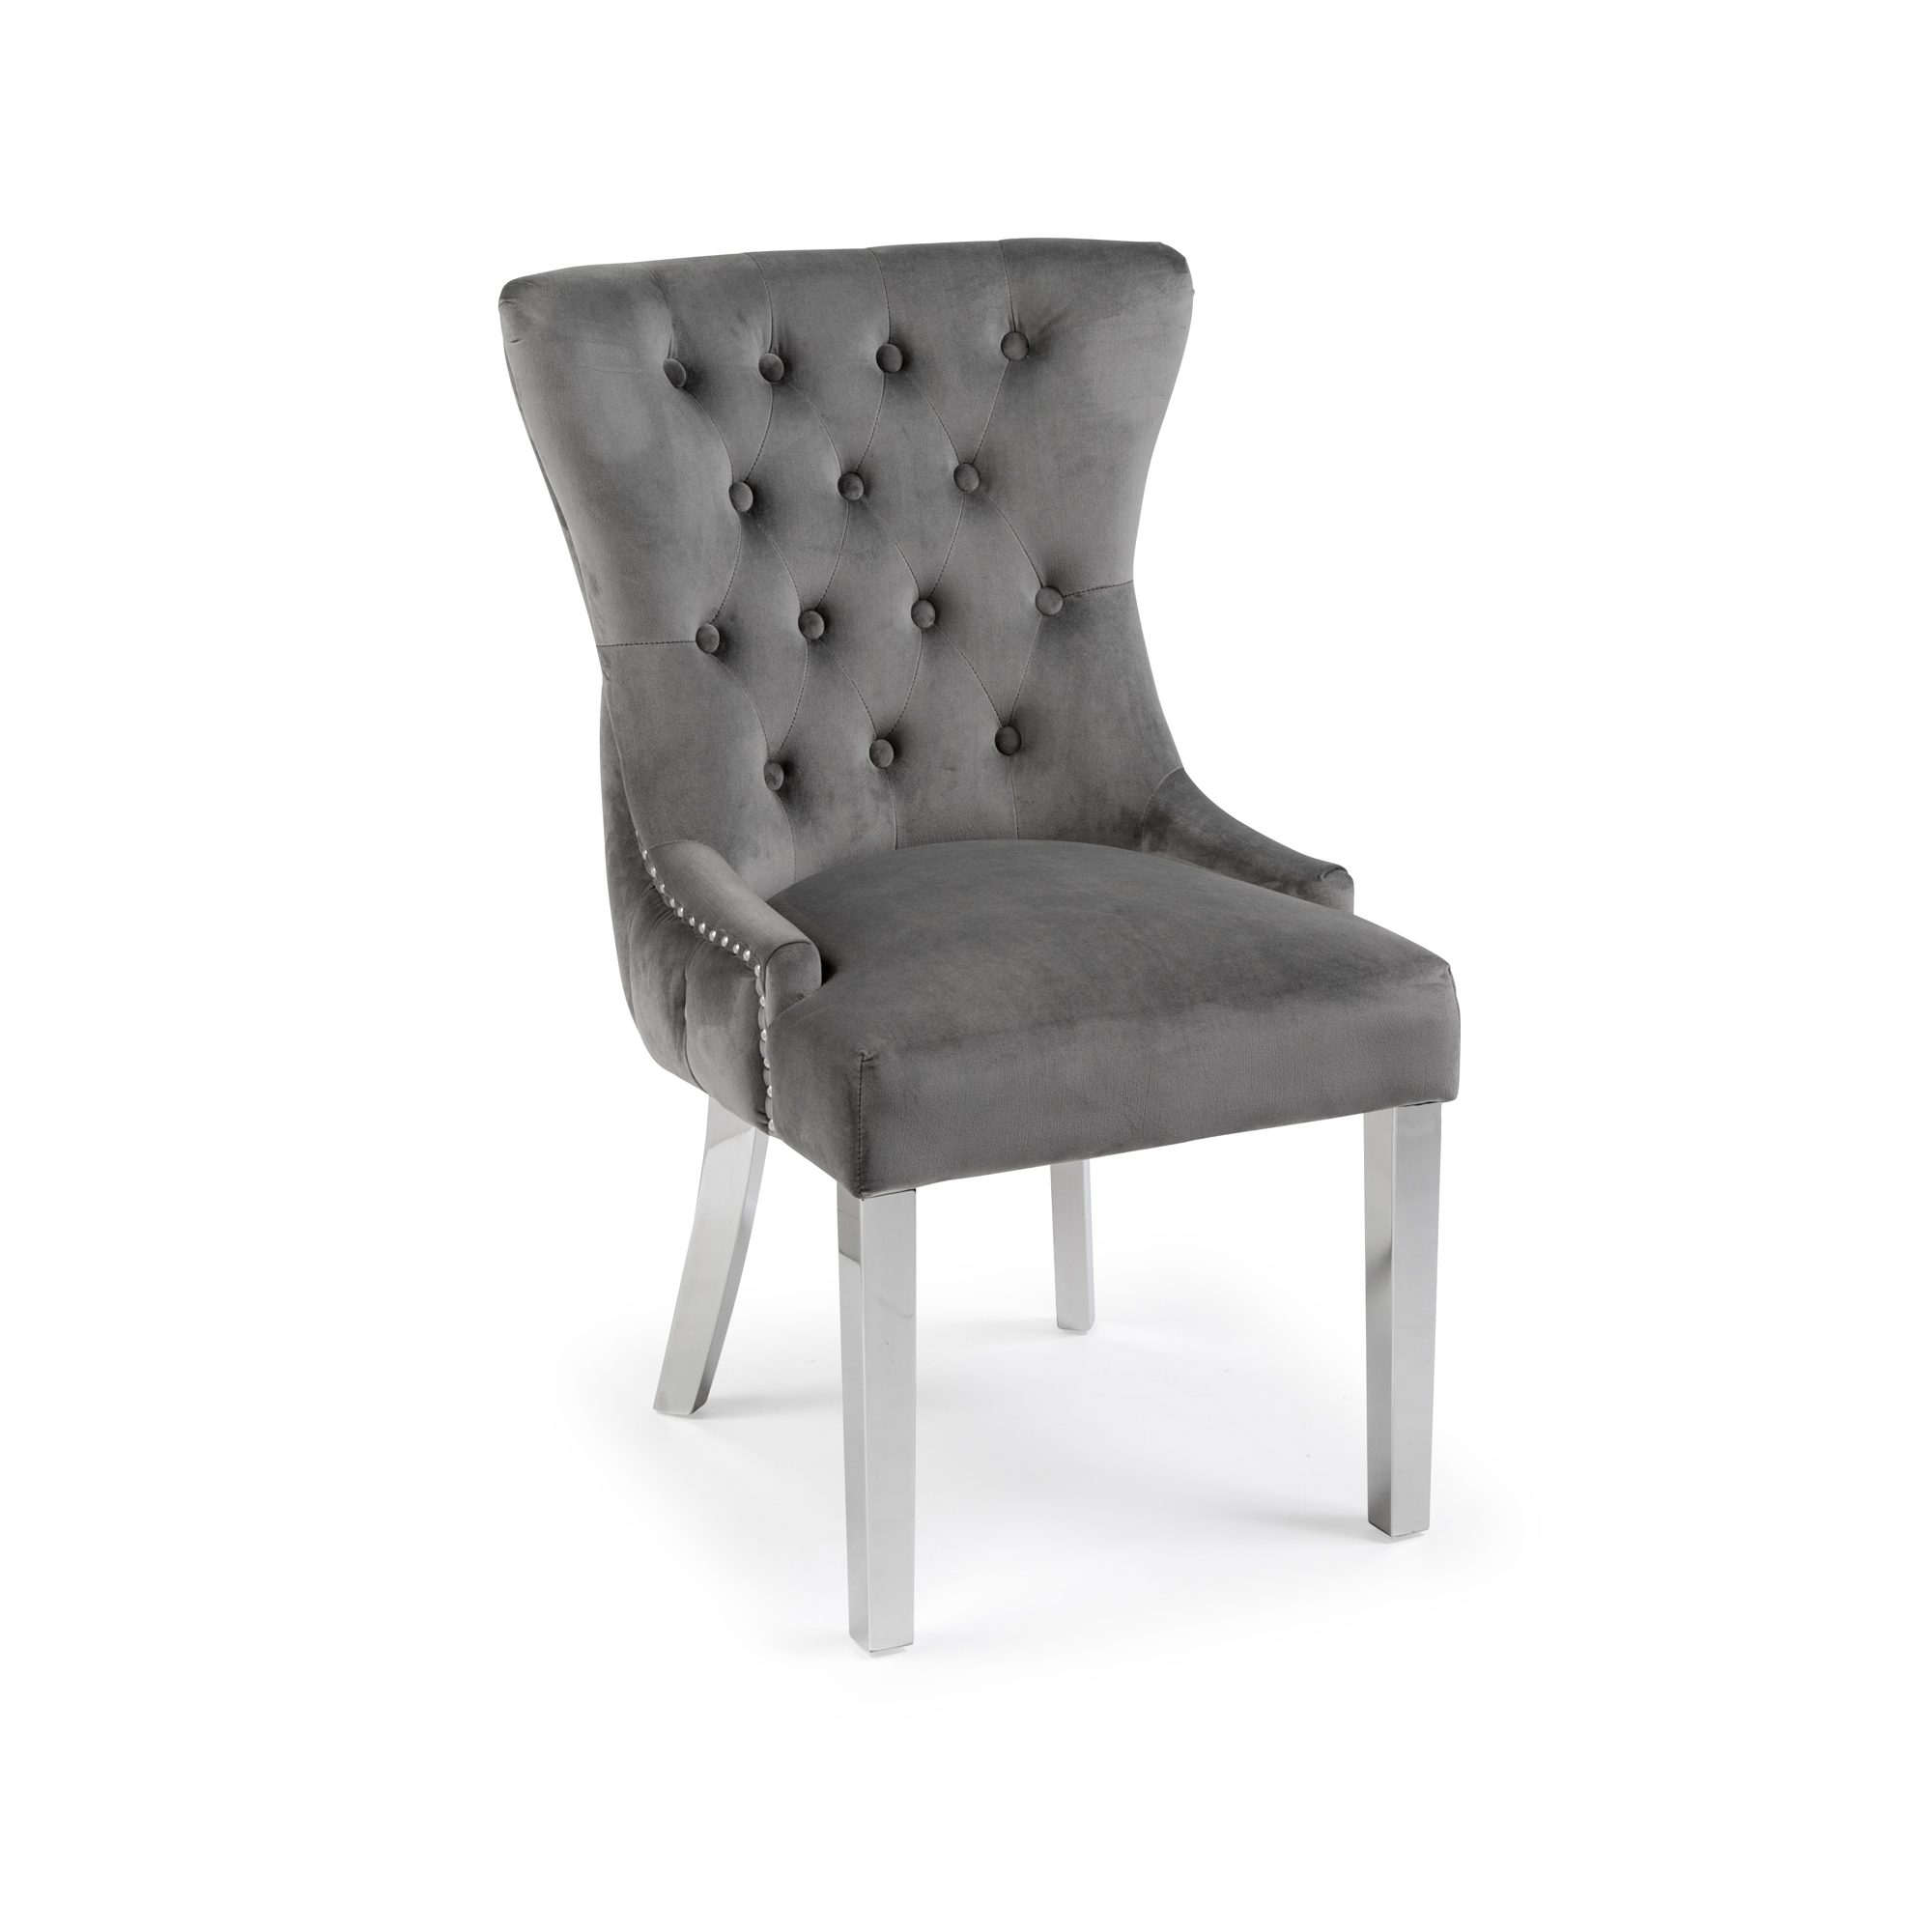 Knightsbridge Grey Velvet Upholstered Dining Room Chair With Button Tufted Detailing – Steel Legs